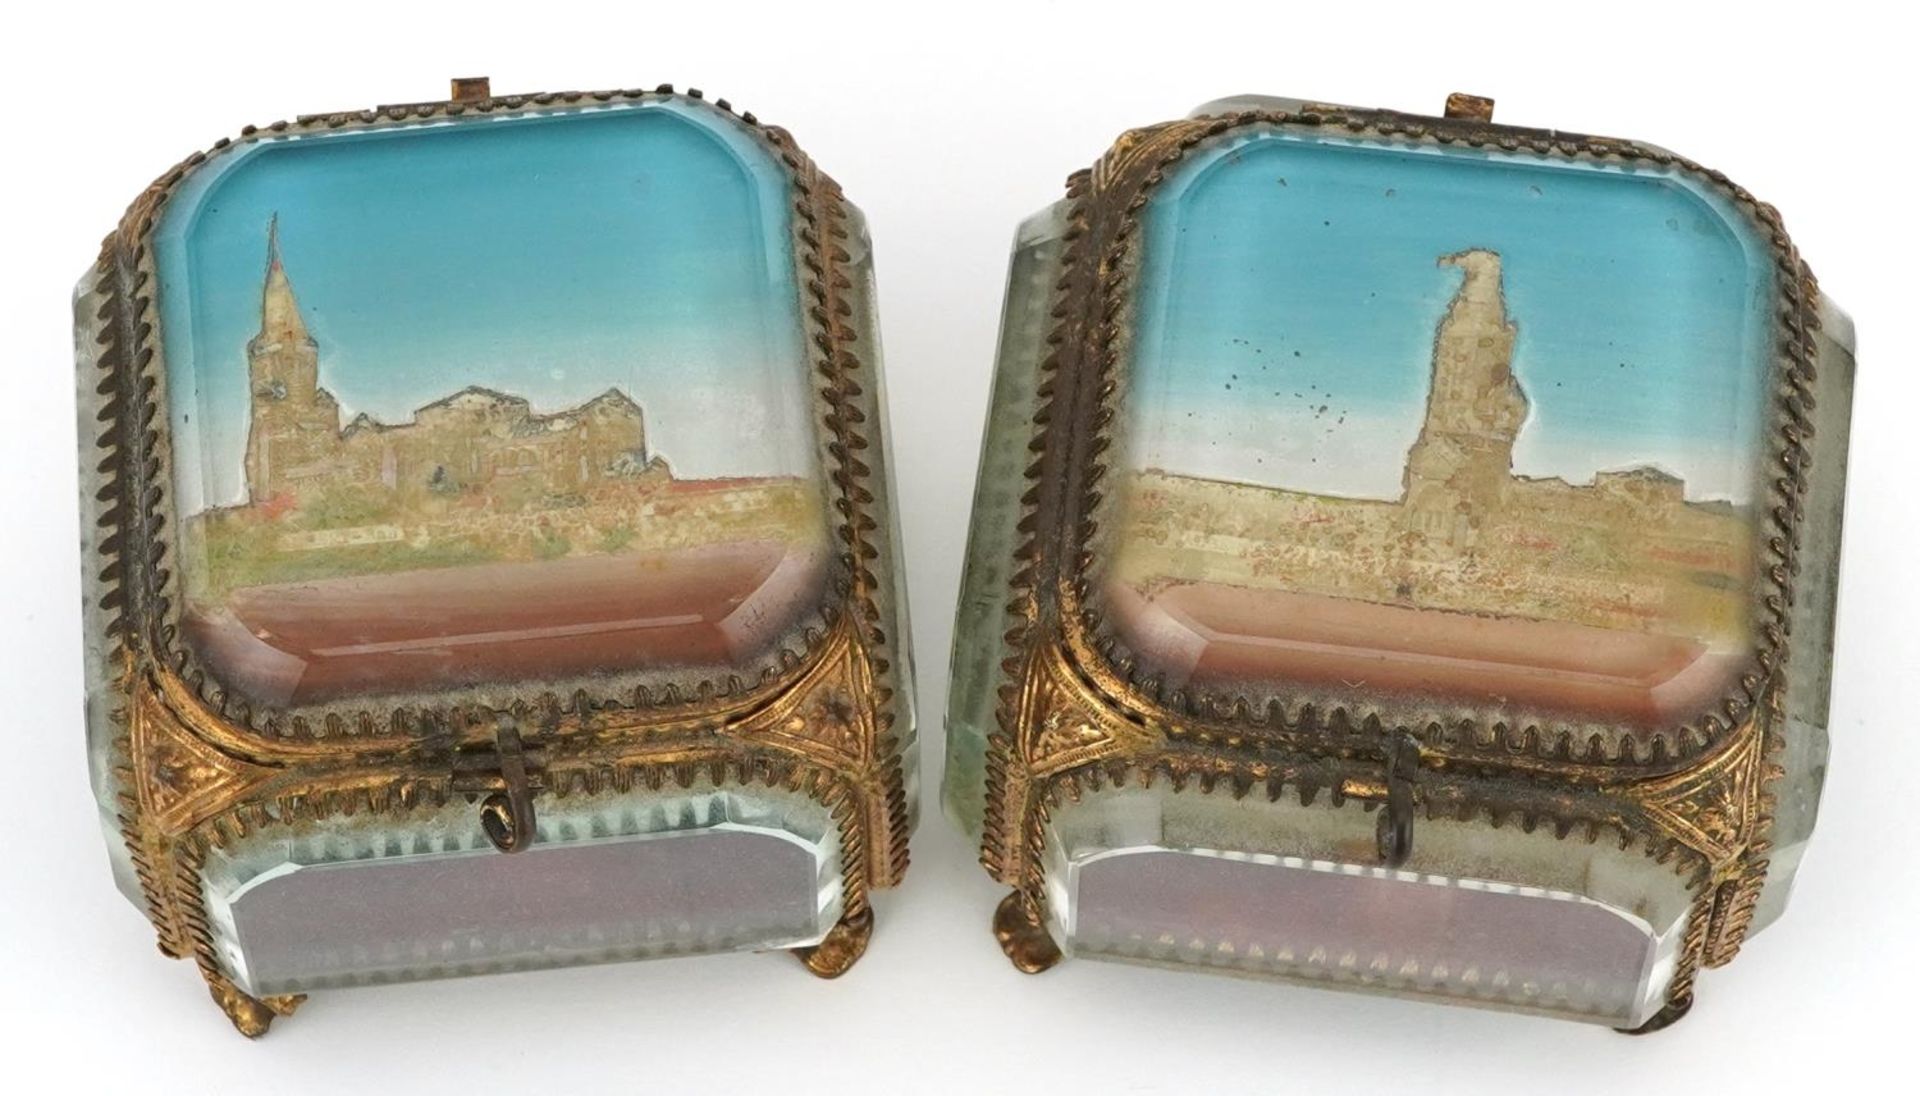 Pair of 19th century Grand Tour jewel caskets with bevelled glass panels and silk button back - Image 2 of 4